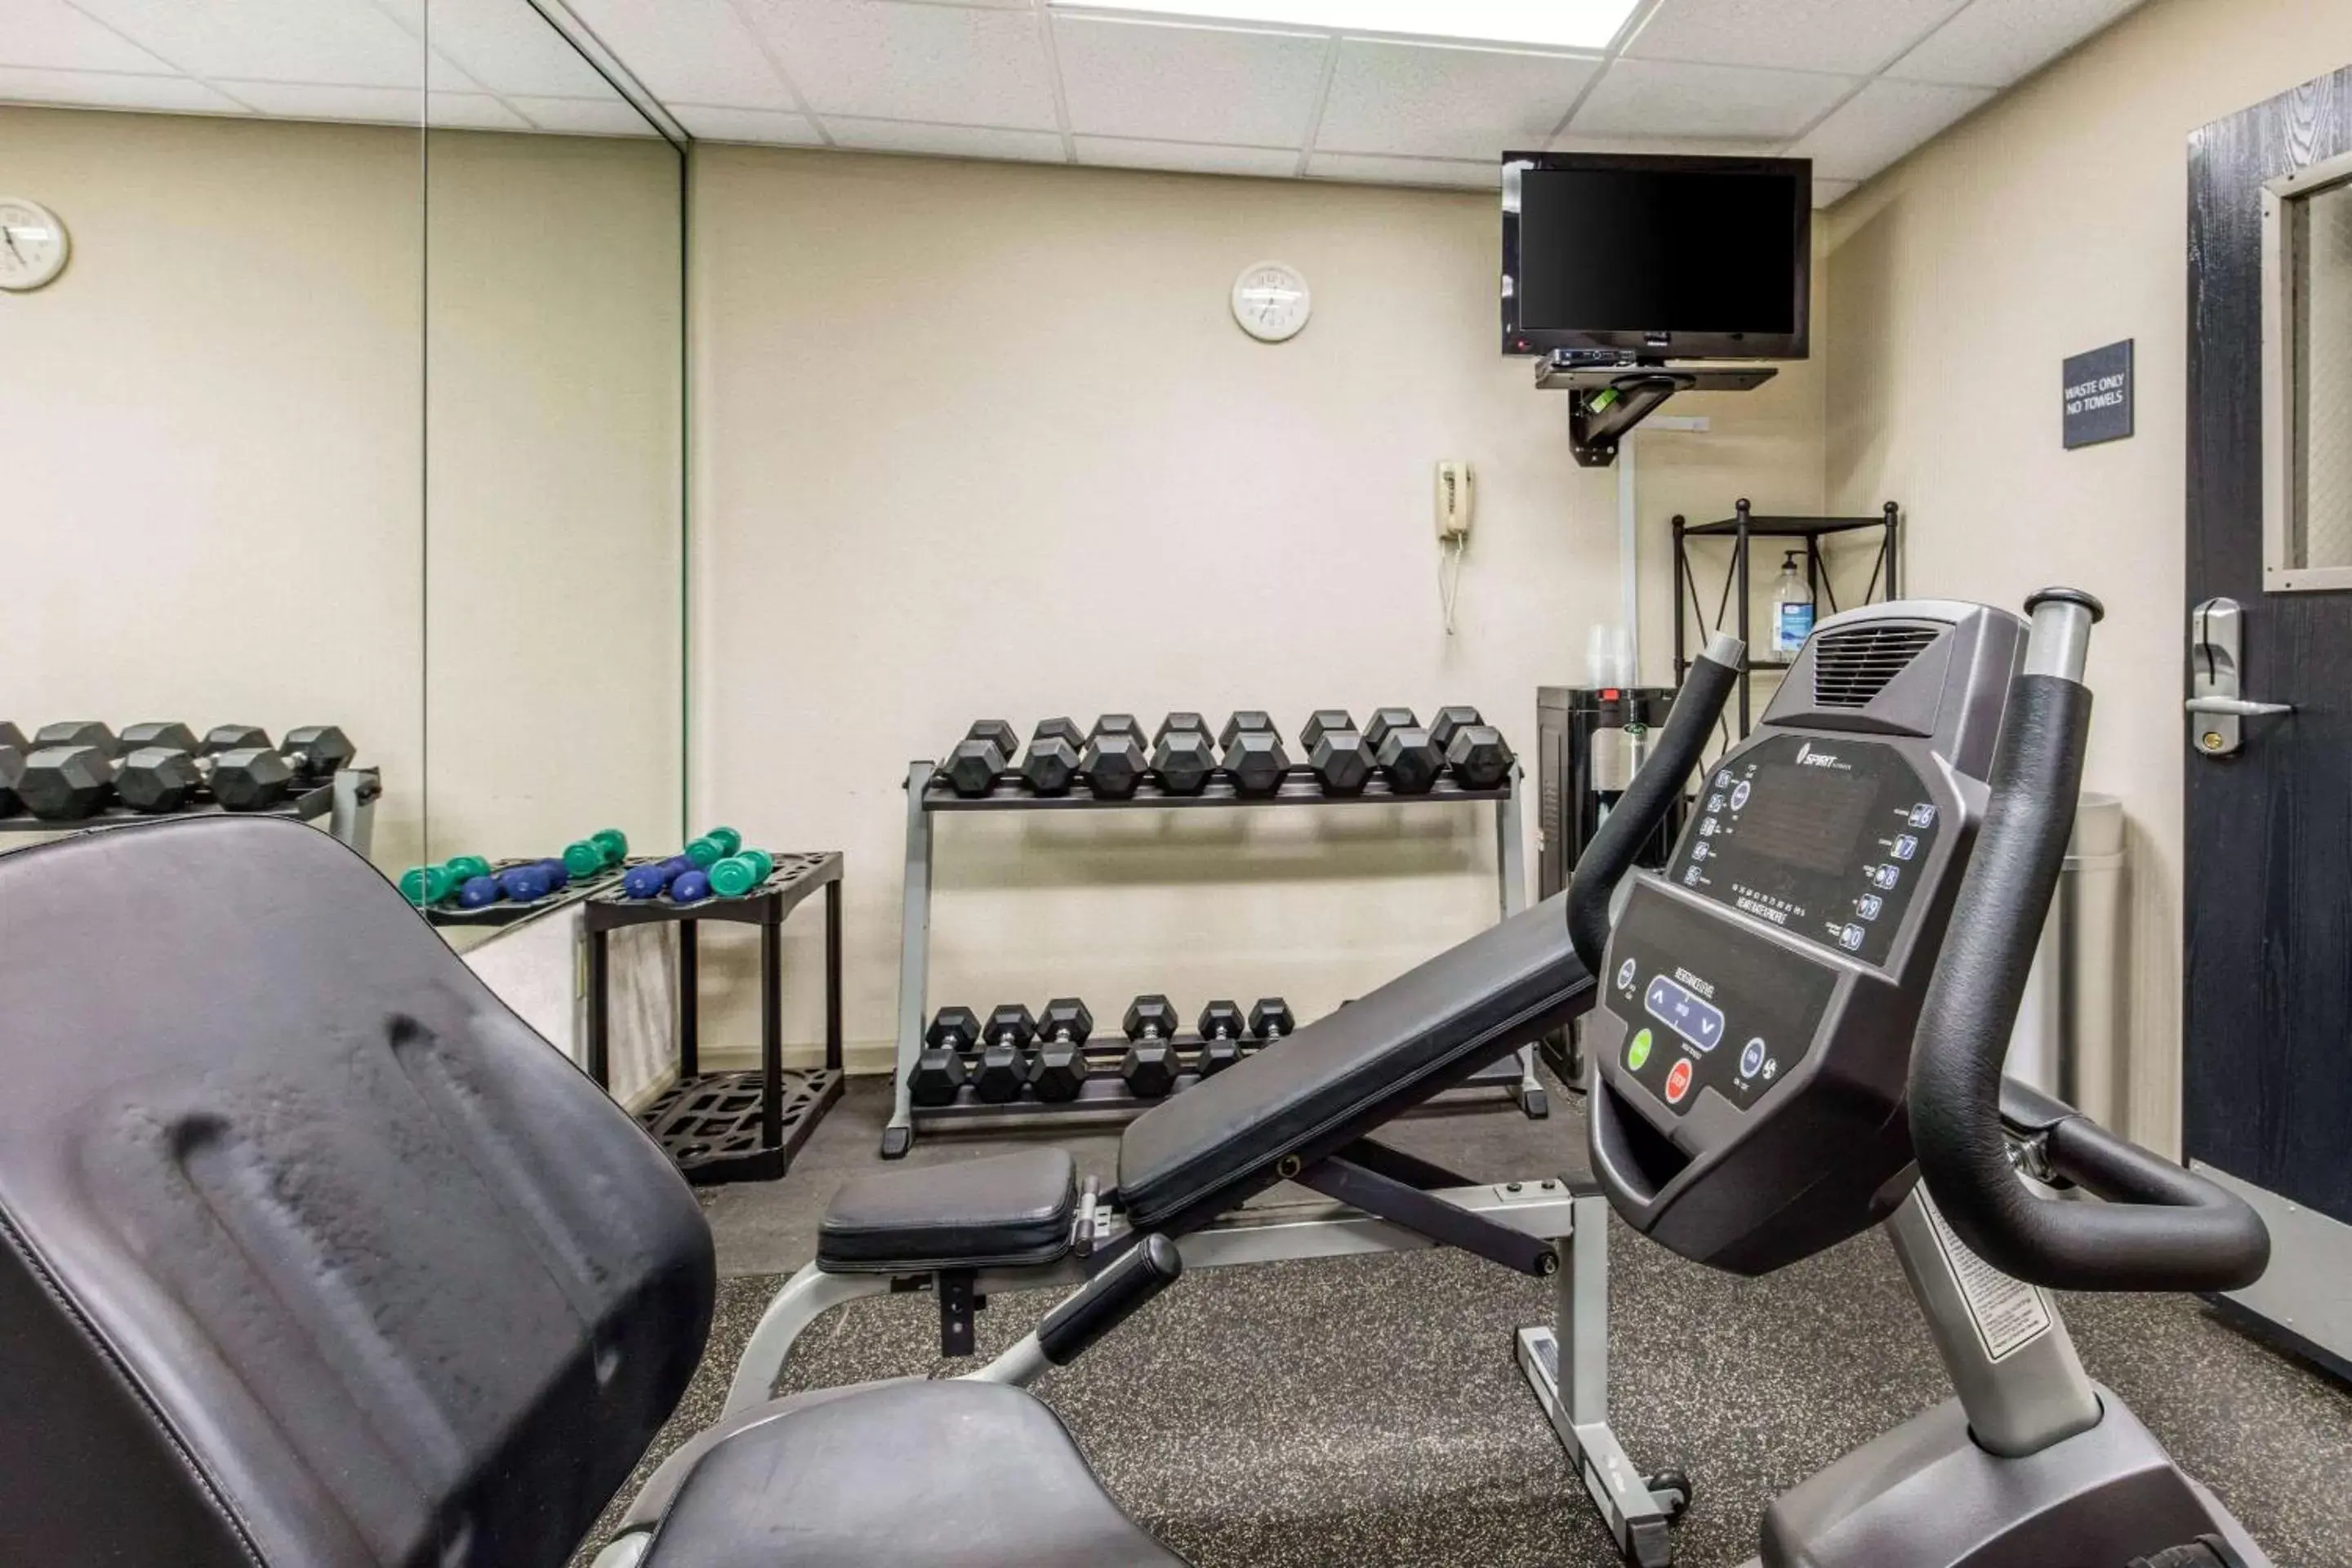 Fitness centre/facilities, Fitness Center/Facilities in Quality Inn Airport I-240